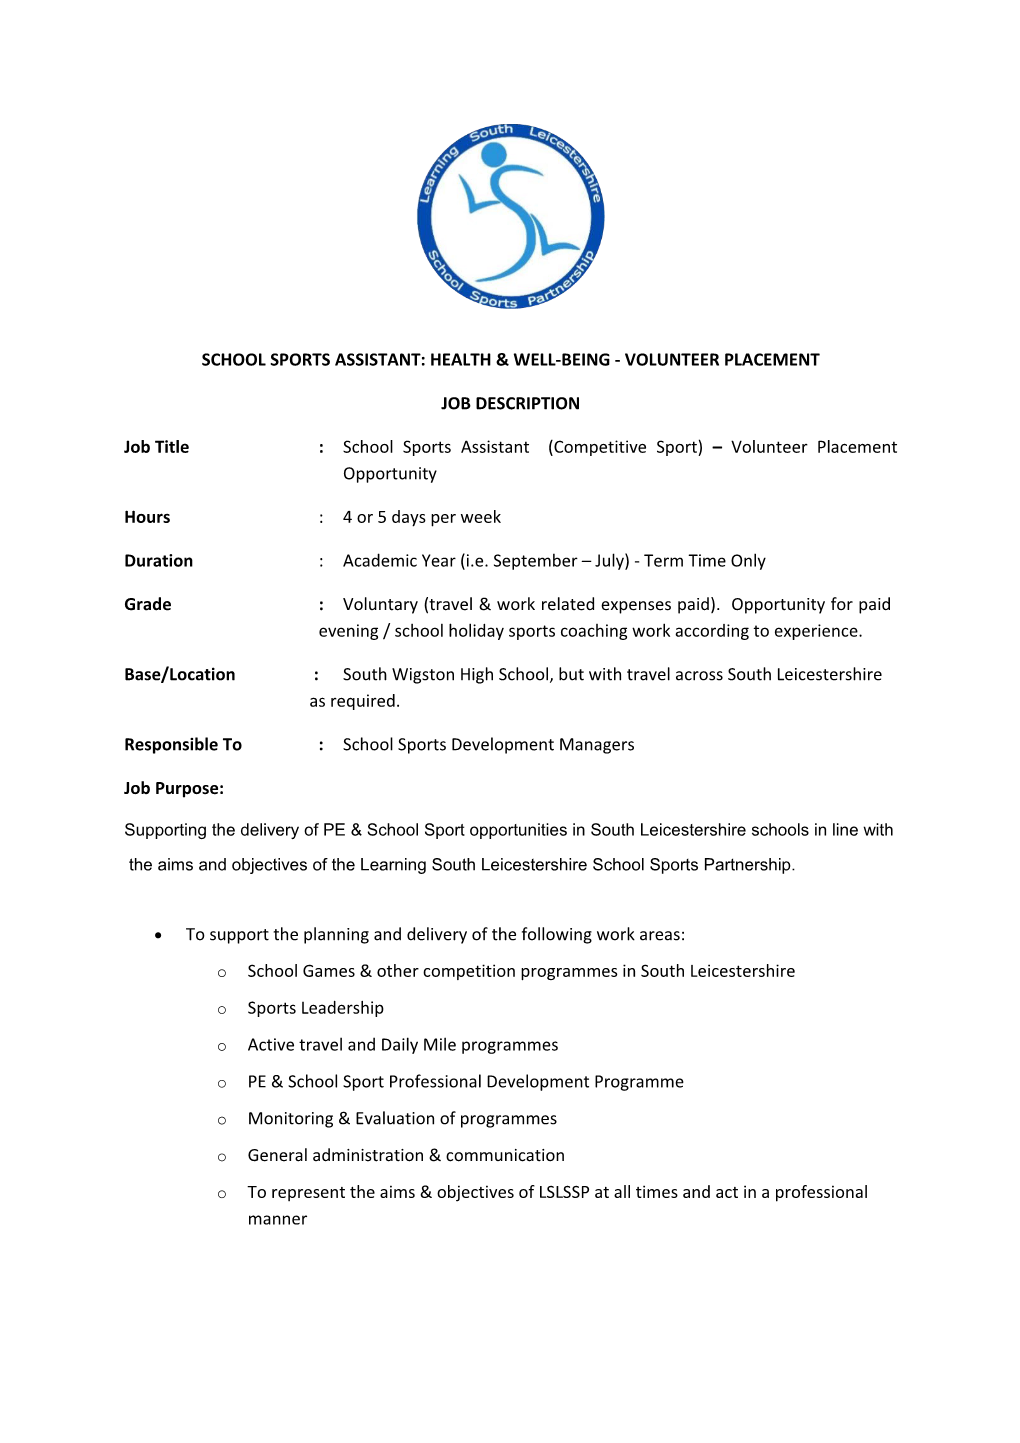 School Sports Assistant: Health & Well-Being - Volunteer Placement